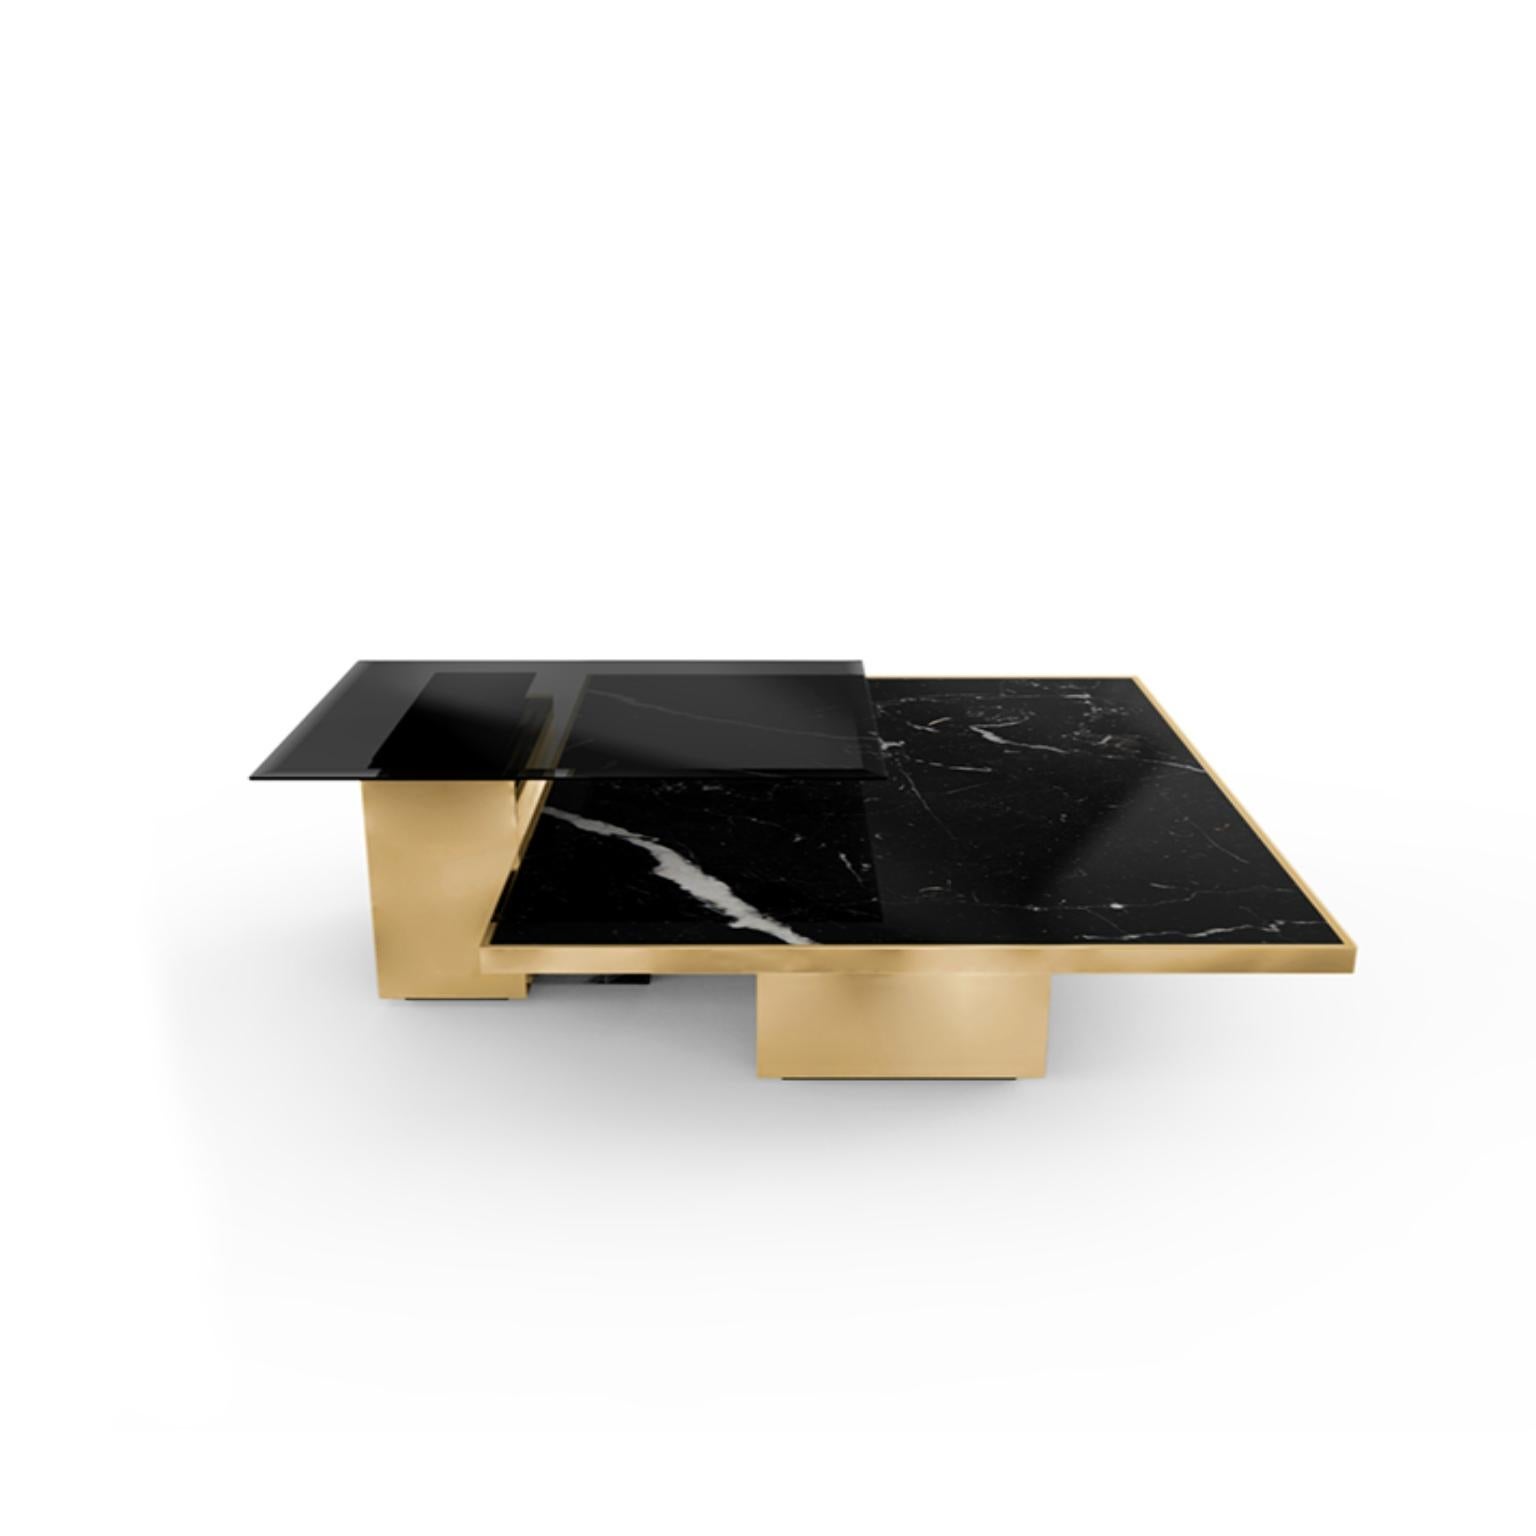 Expertly crafted with Nero Marquina marble, black lacquer, polished brass and with a smoked mirror top, the Thor center table is a stately design. This impactful piece was created to be the center of attention of any living room.
Materials
Body: